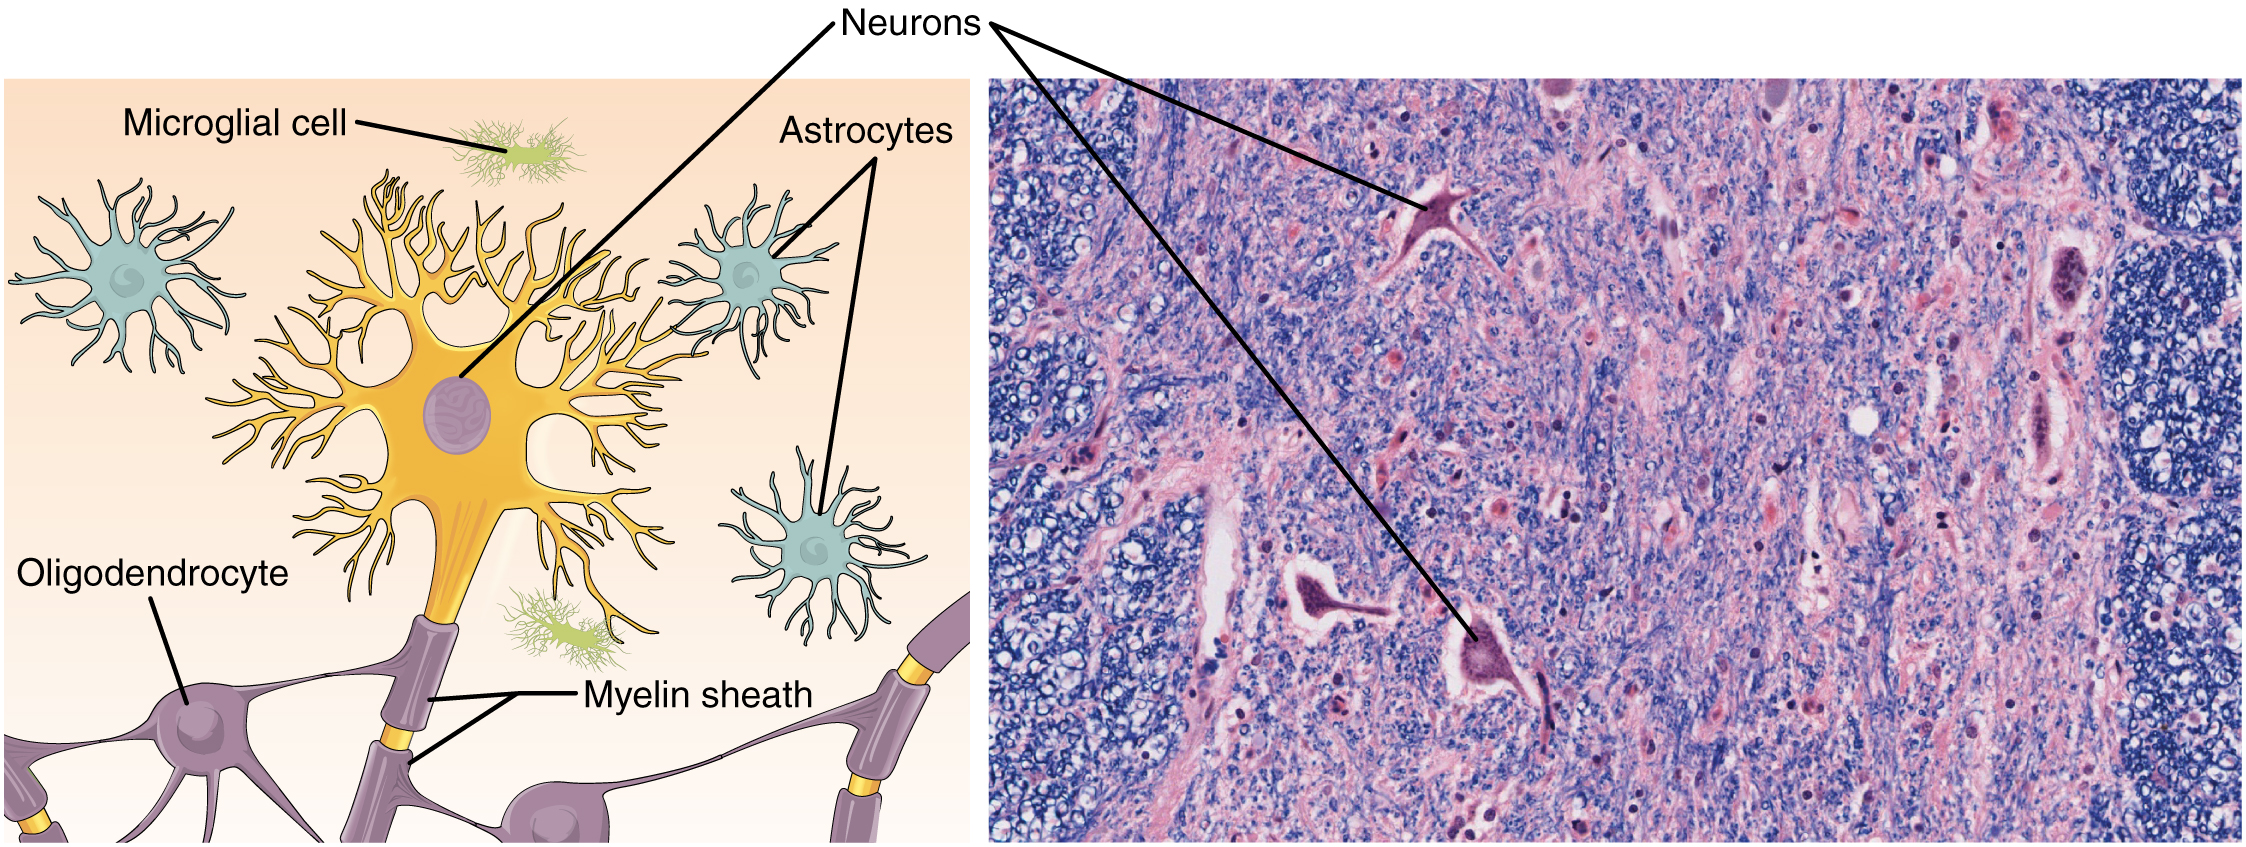 Part A of this diagram shows various types of nerve cells. The largest cell is a neuron. The central body of the neuron contains a single nucleus. Six sets of dendrites project from the top, left and right, edges of the neuron. The dendrites are yellow and branch many times after leaving the cell, taking on the appearance of tiny trees. The axon projects from the bottom edge of the cell and is covered with purple sheaths labeled the myelin sheath. The sheath is not continuous, but instead is a series of equally spaced segments along the axon. Another cell, called an oligodendrocyte, is spider like in appearance, with its leg-like projections each connecting to a segment of the neuron’s myelin sheath. Above the neuron are three astrocytes. They are much smaller than the neuron and have no axons, and are also irregularly shaped cells with many dendrites projecting from the central body. Finally, a microglial cell is shown above the neuron. It is the smallest of the cells in this figure and is an elongated cell with many fine, tentacle-like projections. The projections are concentrated at the two ends of the cell, with the middle area lacking any projections. The micrograph of the neural tissue shows that this tissue is very heterogenous, with both large and small cells embedded in the matrix. Much of the space between the cells is occupied by threadlike nerve fibers.